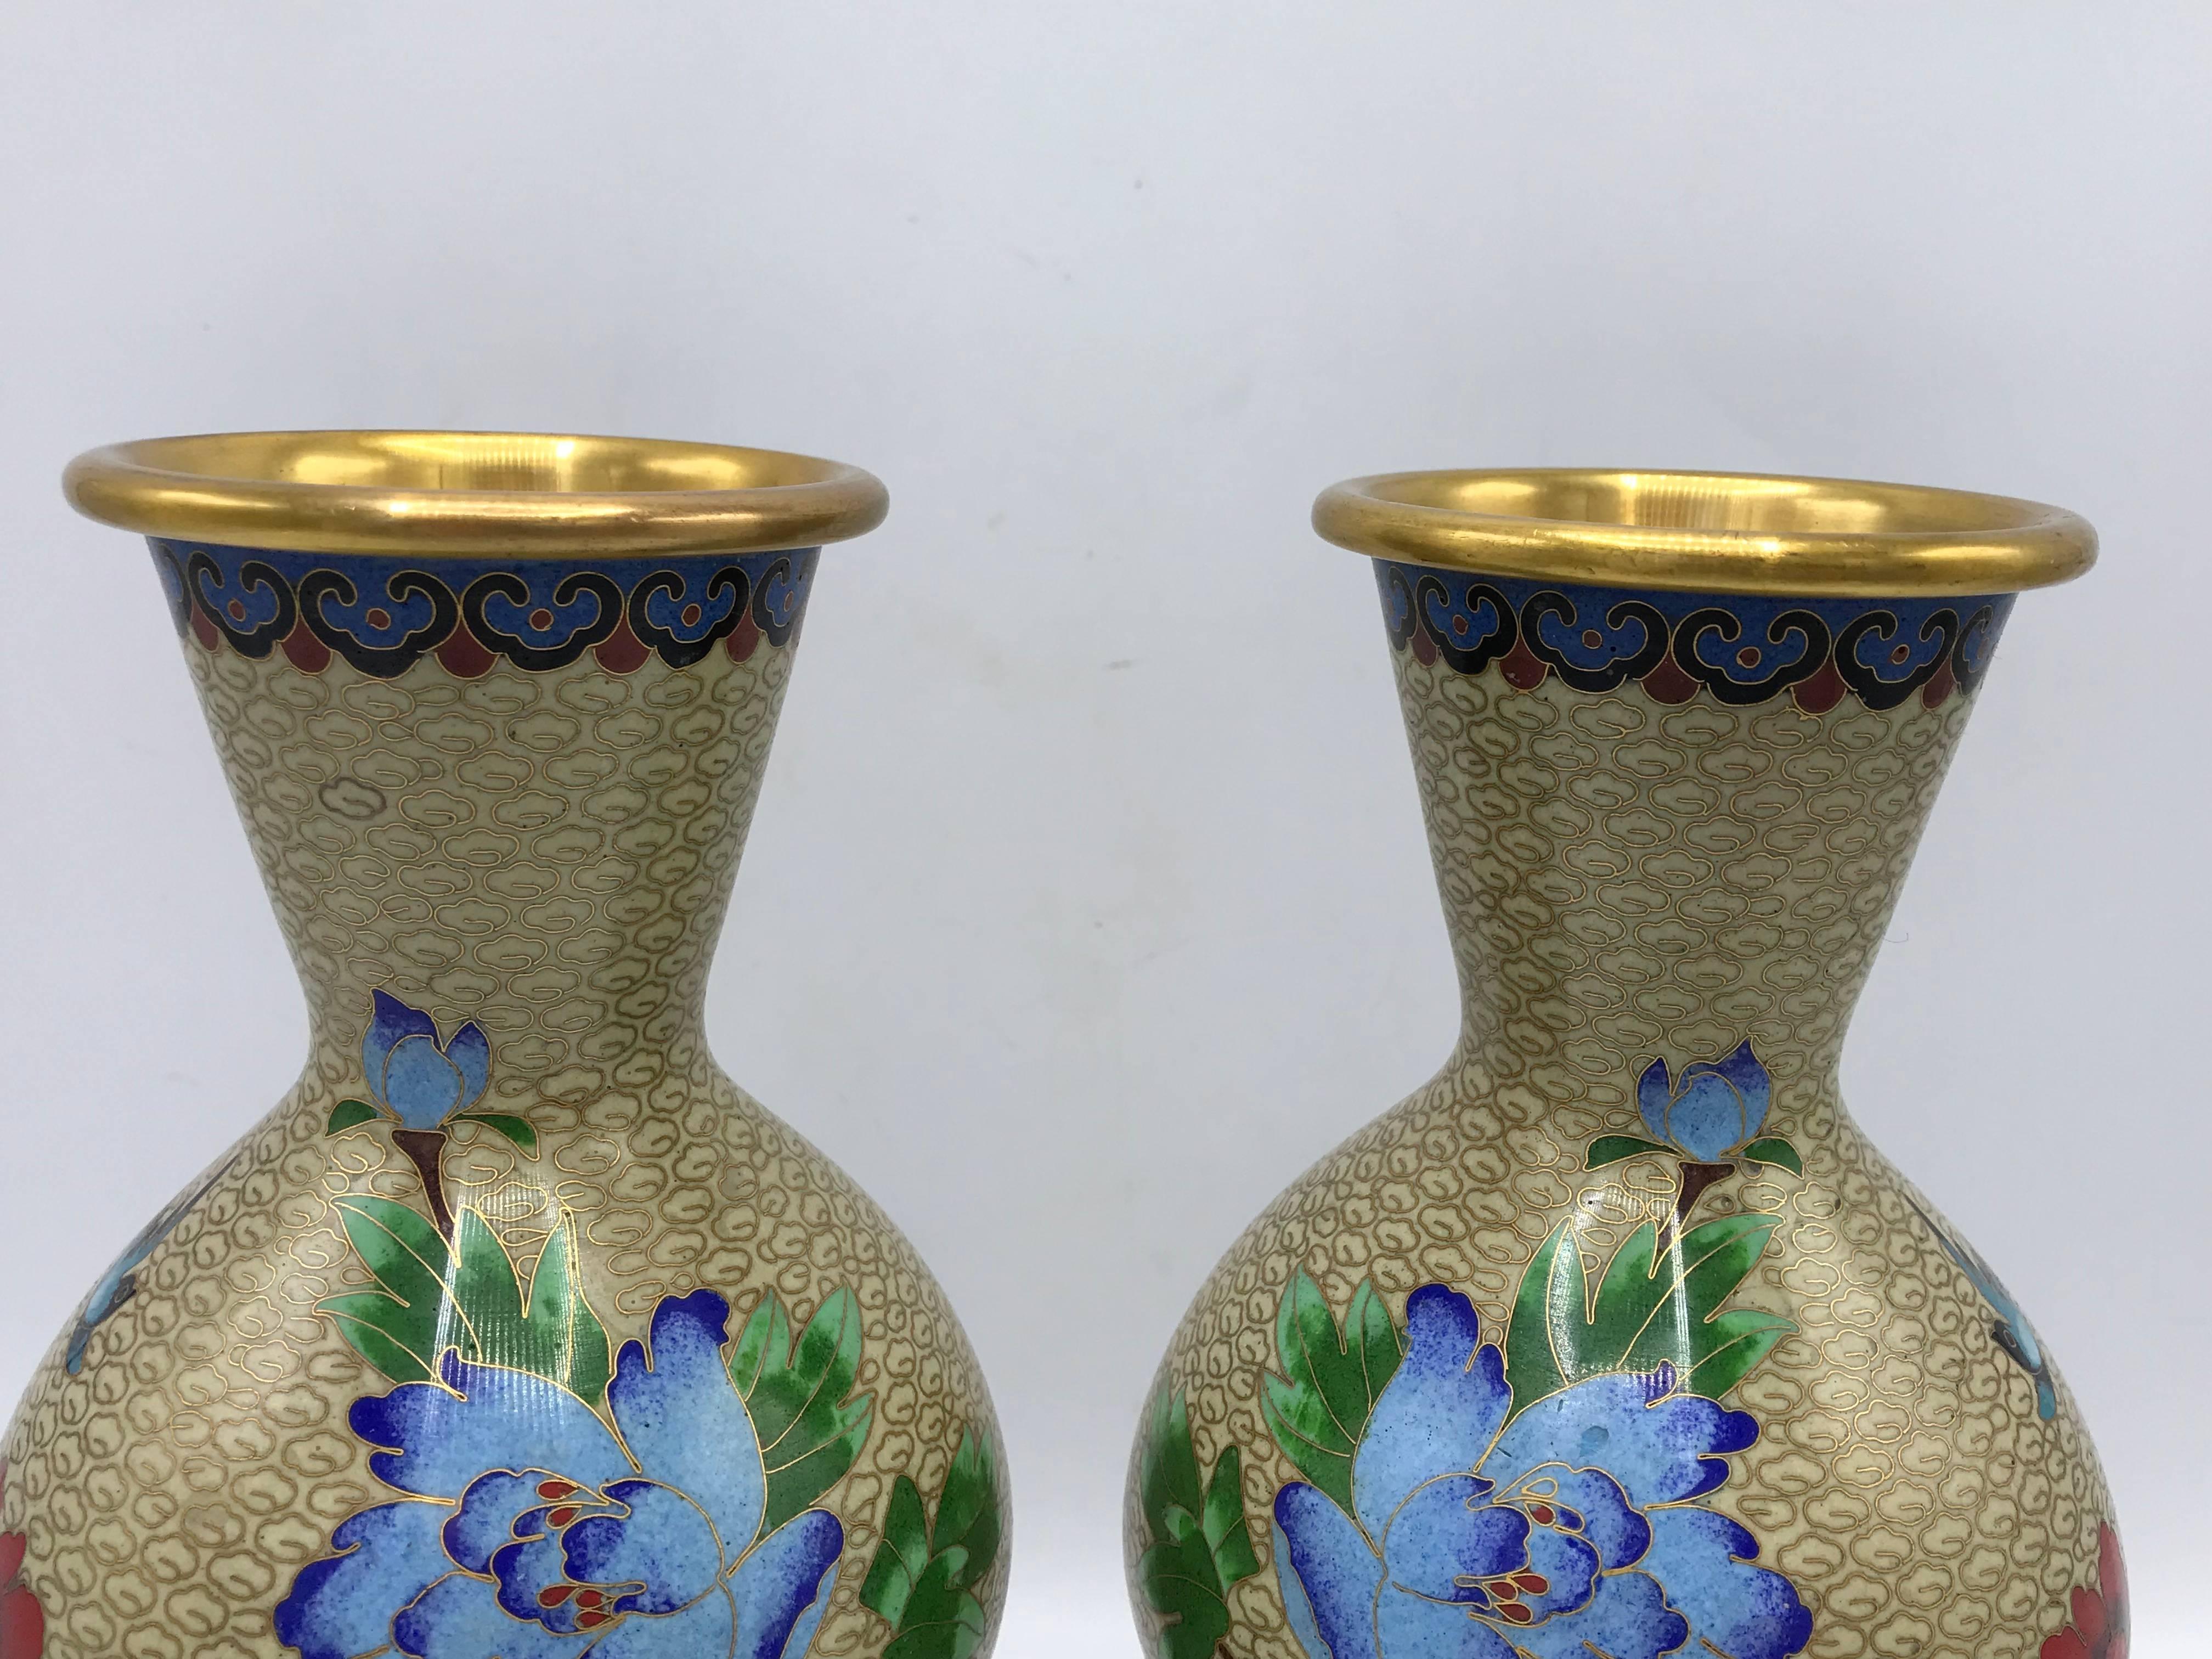 Offered is a beautiful, pair of 1960s cloisonné vases with a polychrome floral motif. Beautiful shades of blues, reds, greens, and purples pop against a soft tan background. The pair includes matching, decorative wood stands. Measures: 8.5